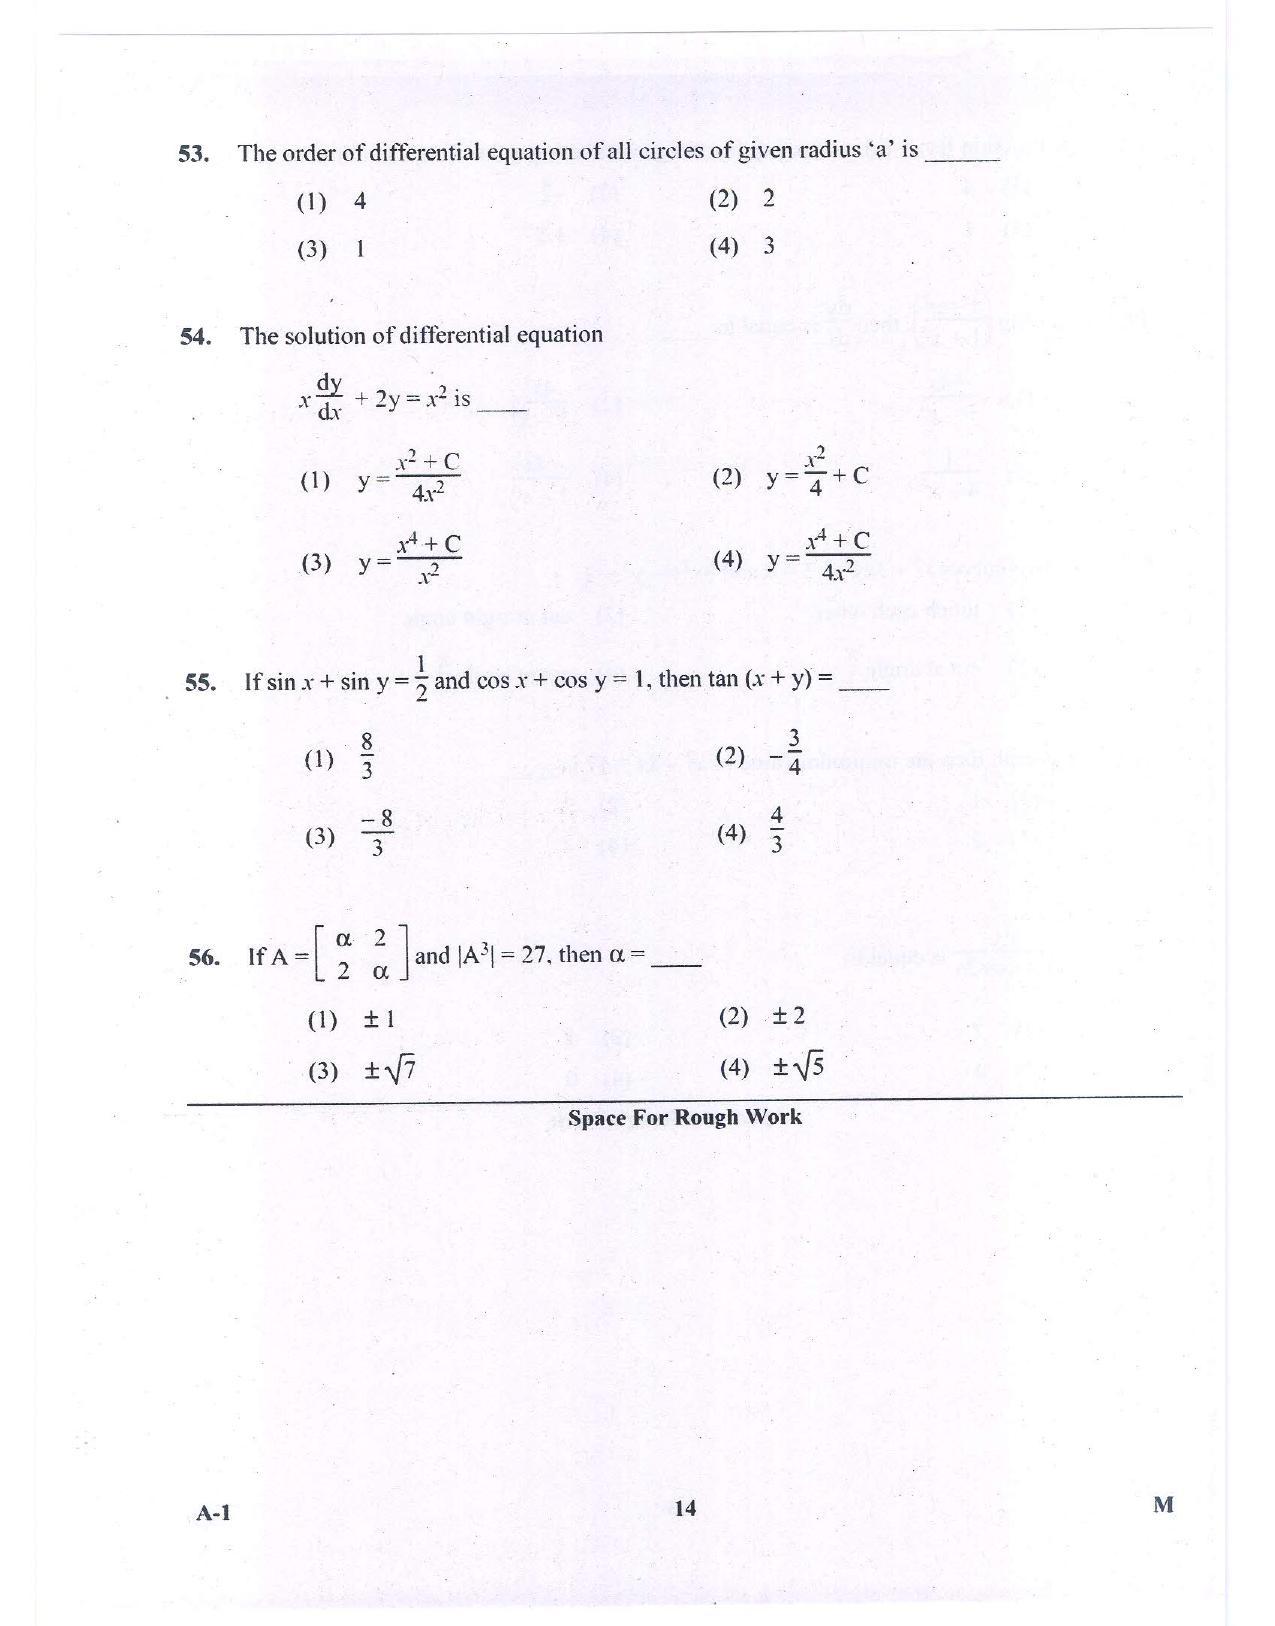 KCET Mathematics 2015 Question Papers - Page 14